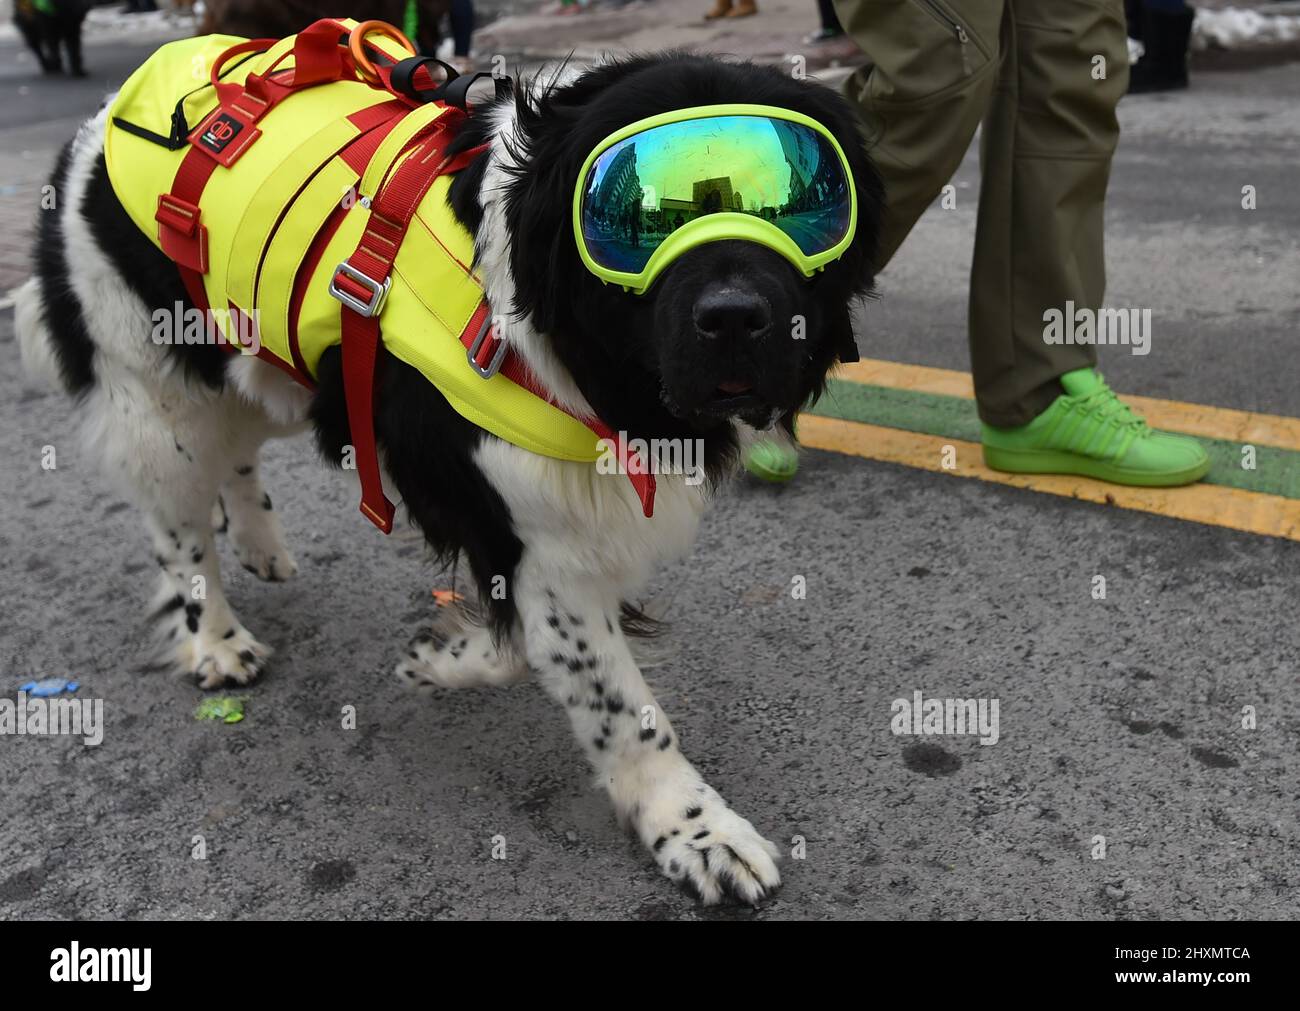 Wilkes Barre, United States. 13th Mar, 2022. A rescue dog wearing goggles seen during the Saint Patrick's Parade. Saturday's winter storm left 5 inches of snow but the Saint Patrick's Parade in Downtown Wilkes-Barre proceeded Sunday. City workers cleared streets late Saturday and early Sunday. The temperature for the parade never made it above 30 degrees. Credit: SOPA Images Limited/Alamy Live News Stock Photo